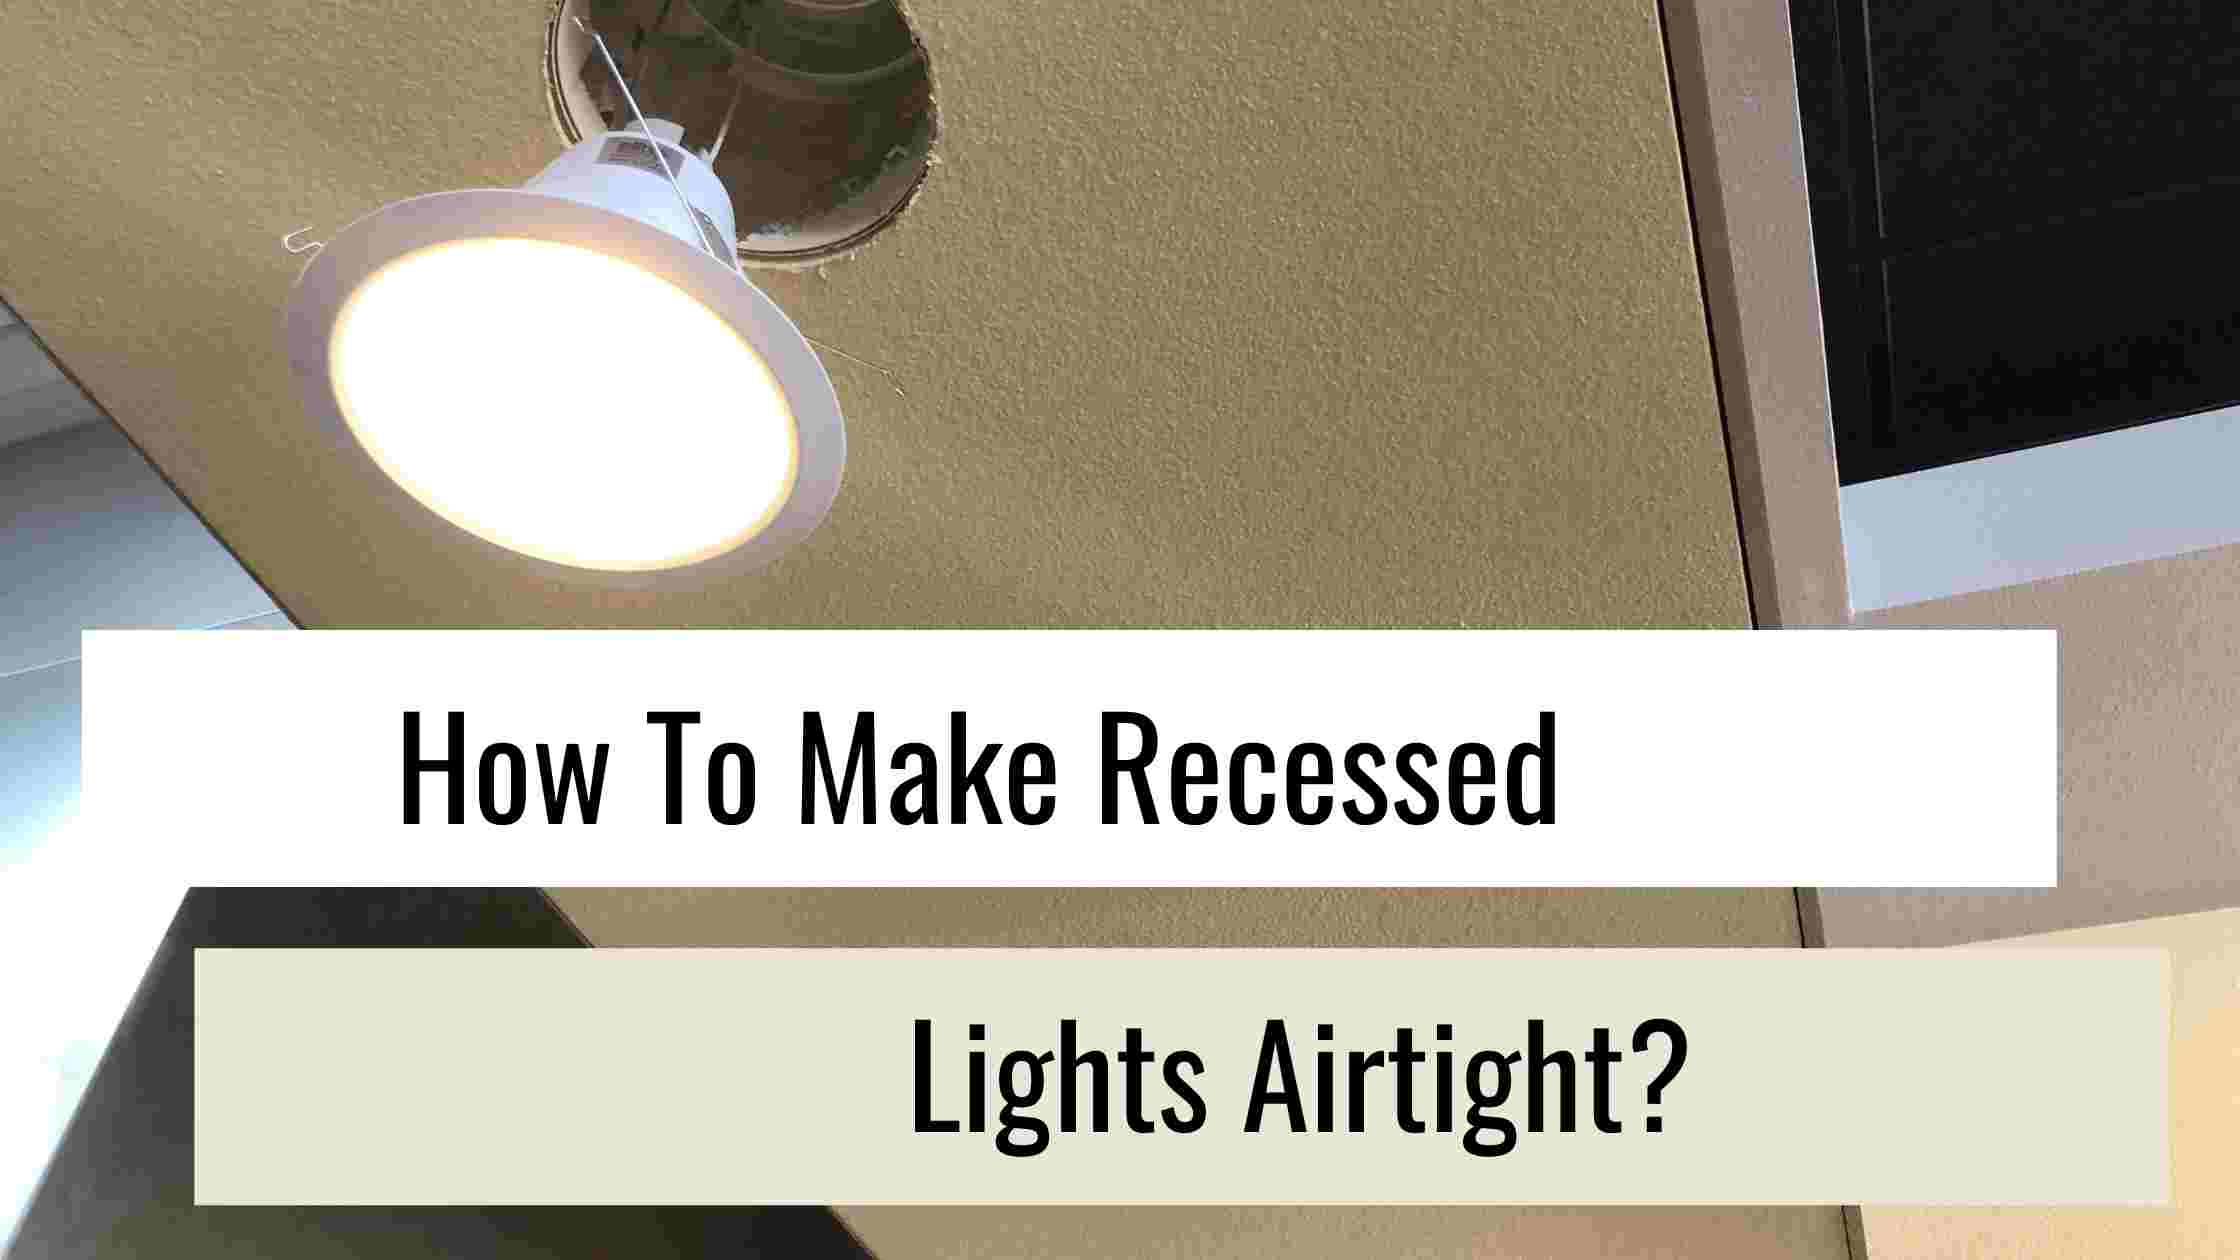 How To Make Recessed Lights Airtight, When To Use Airtight Recessed Lighting